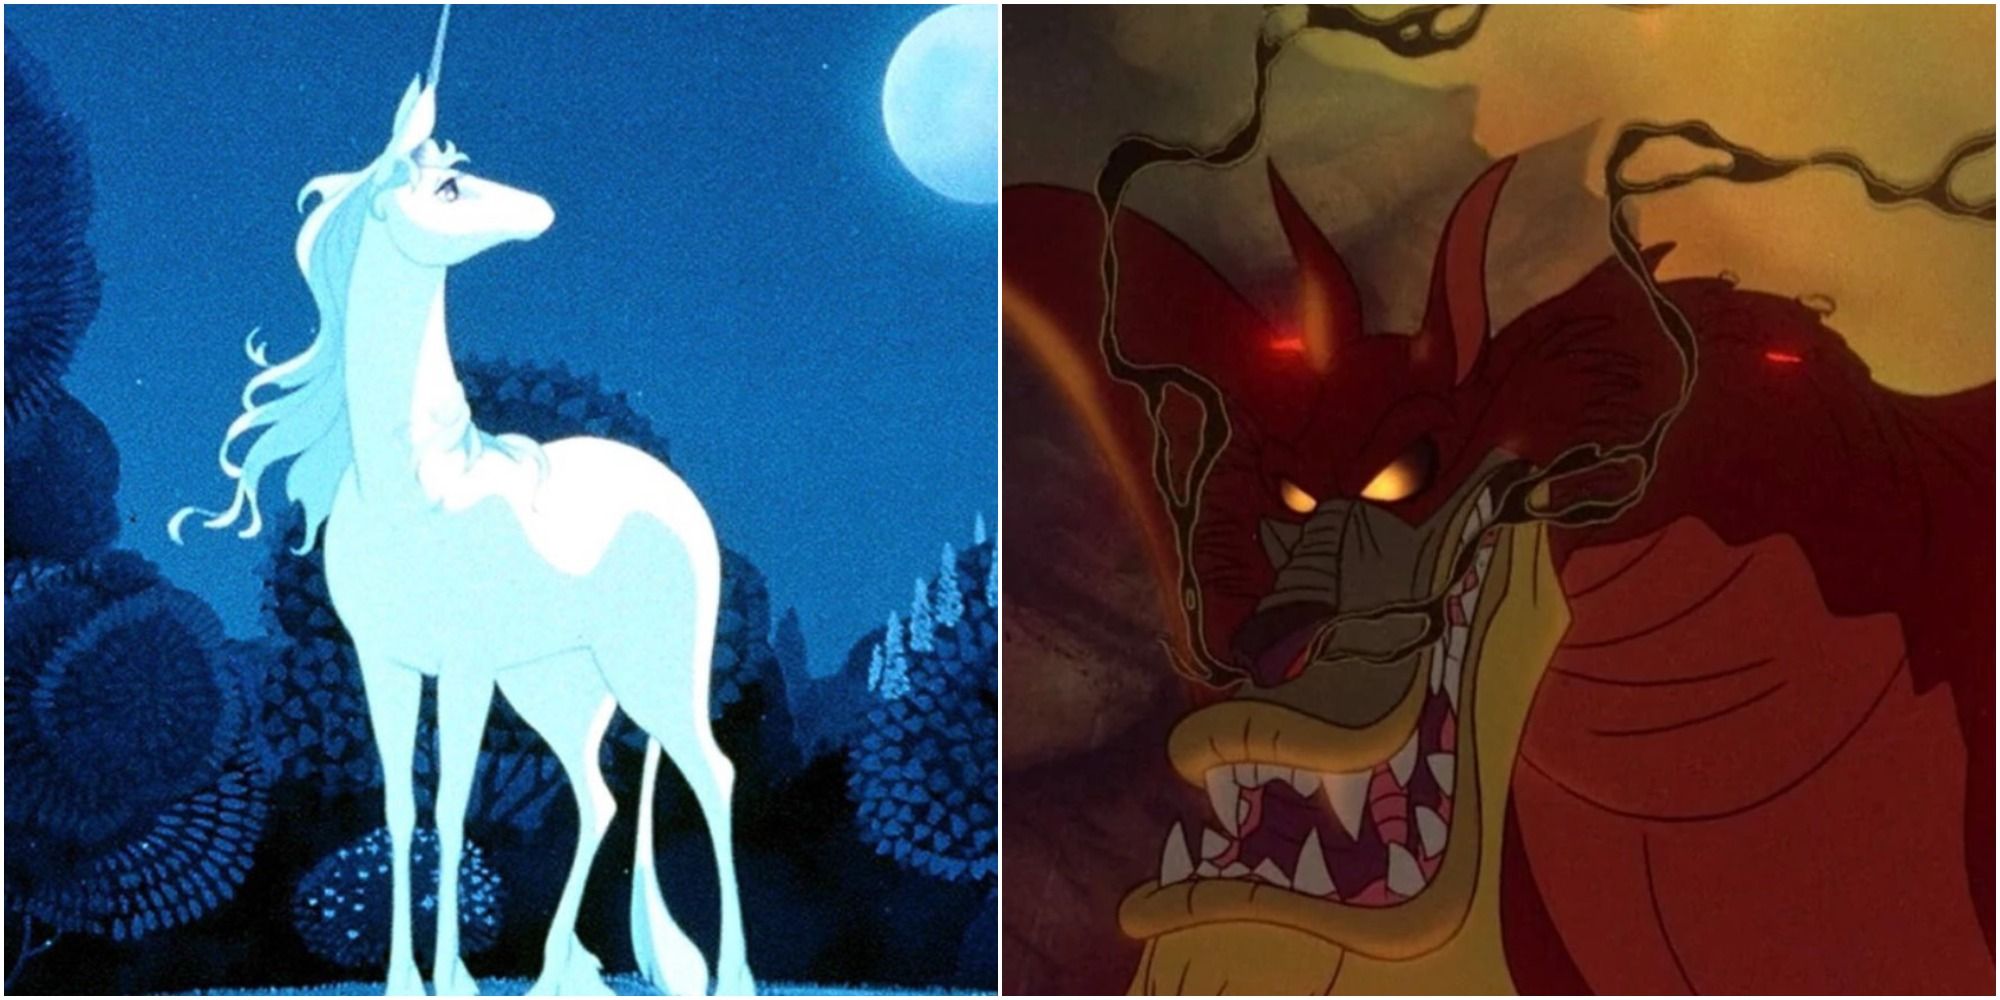 The Last Unicorn and All Dogs Go To Heaven